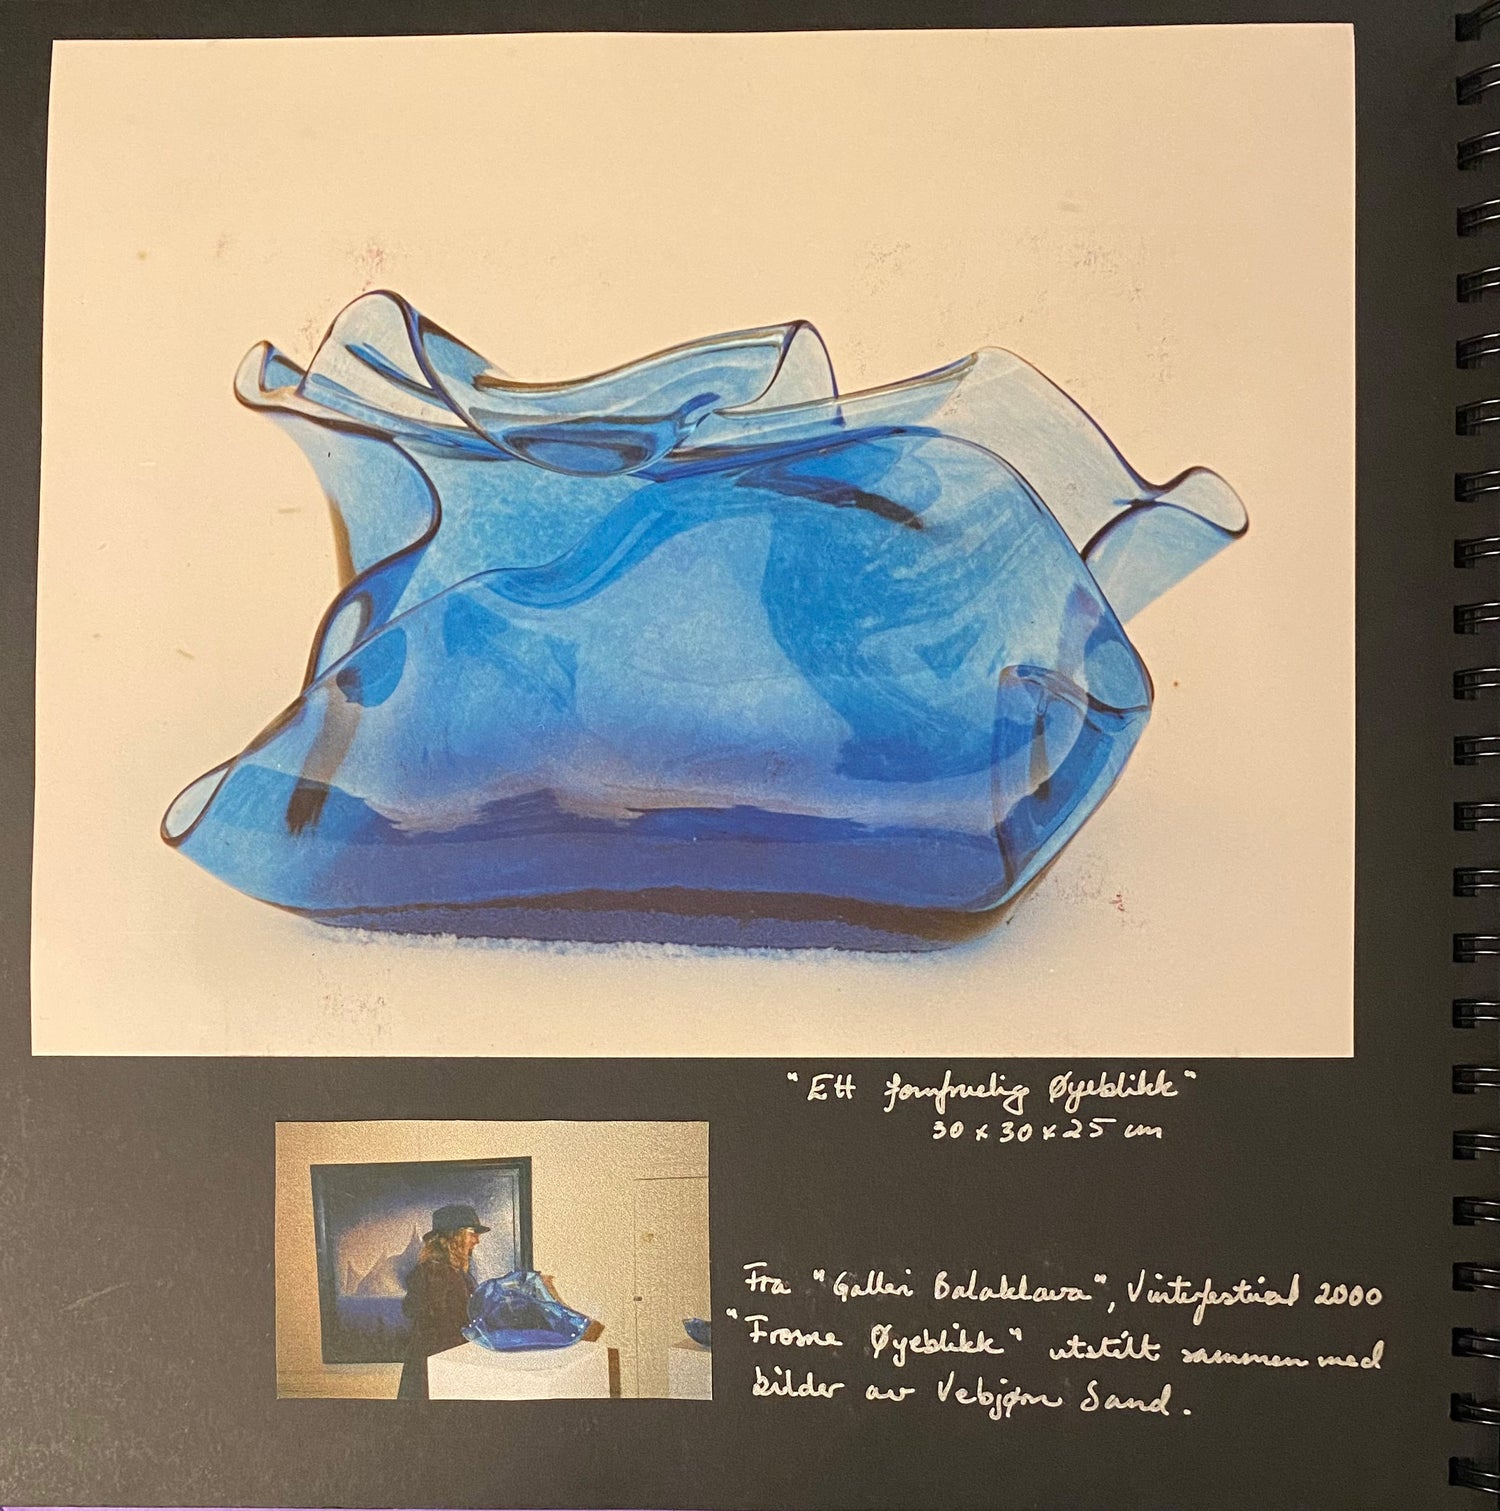 Displaying a photo album with 2 blue glass sculptures of Jenny Mørk with a women passing by and a painting of Vebjørn Sand in the background